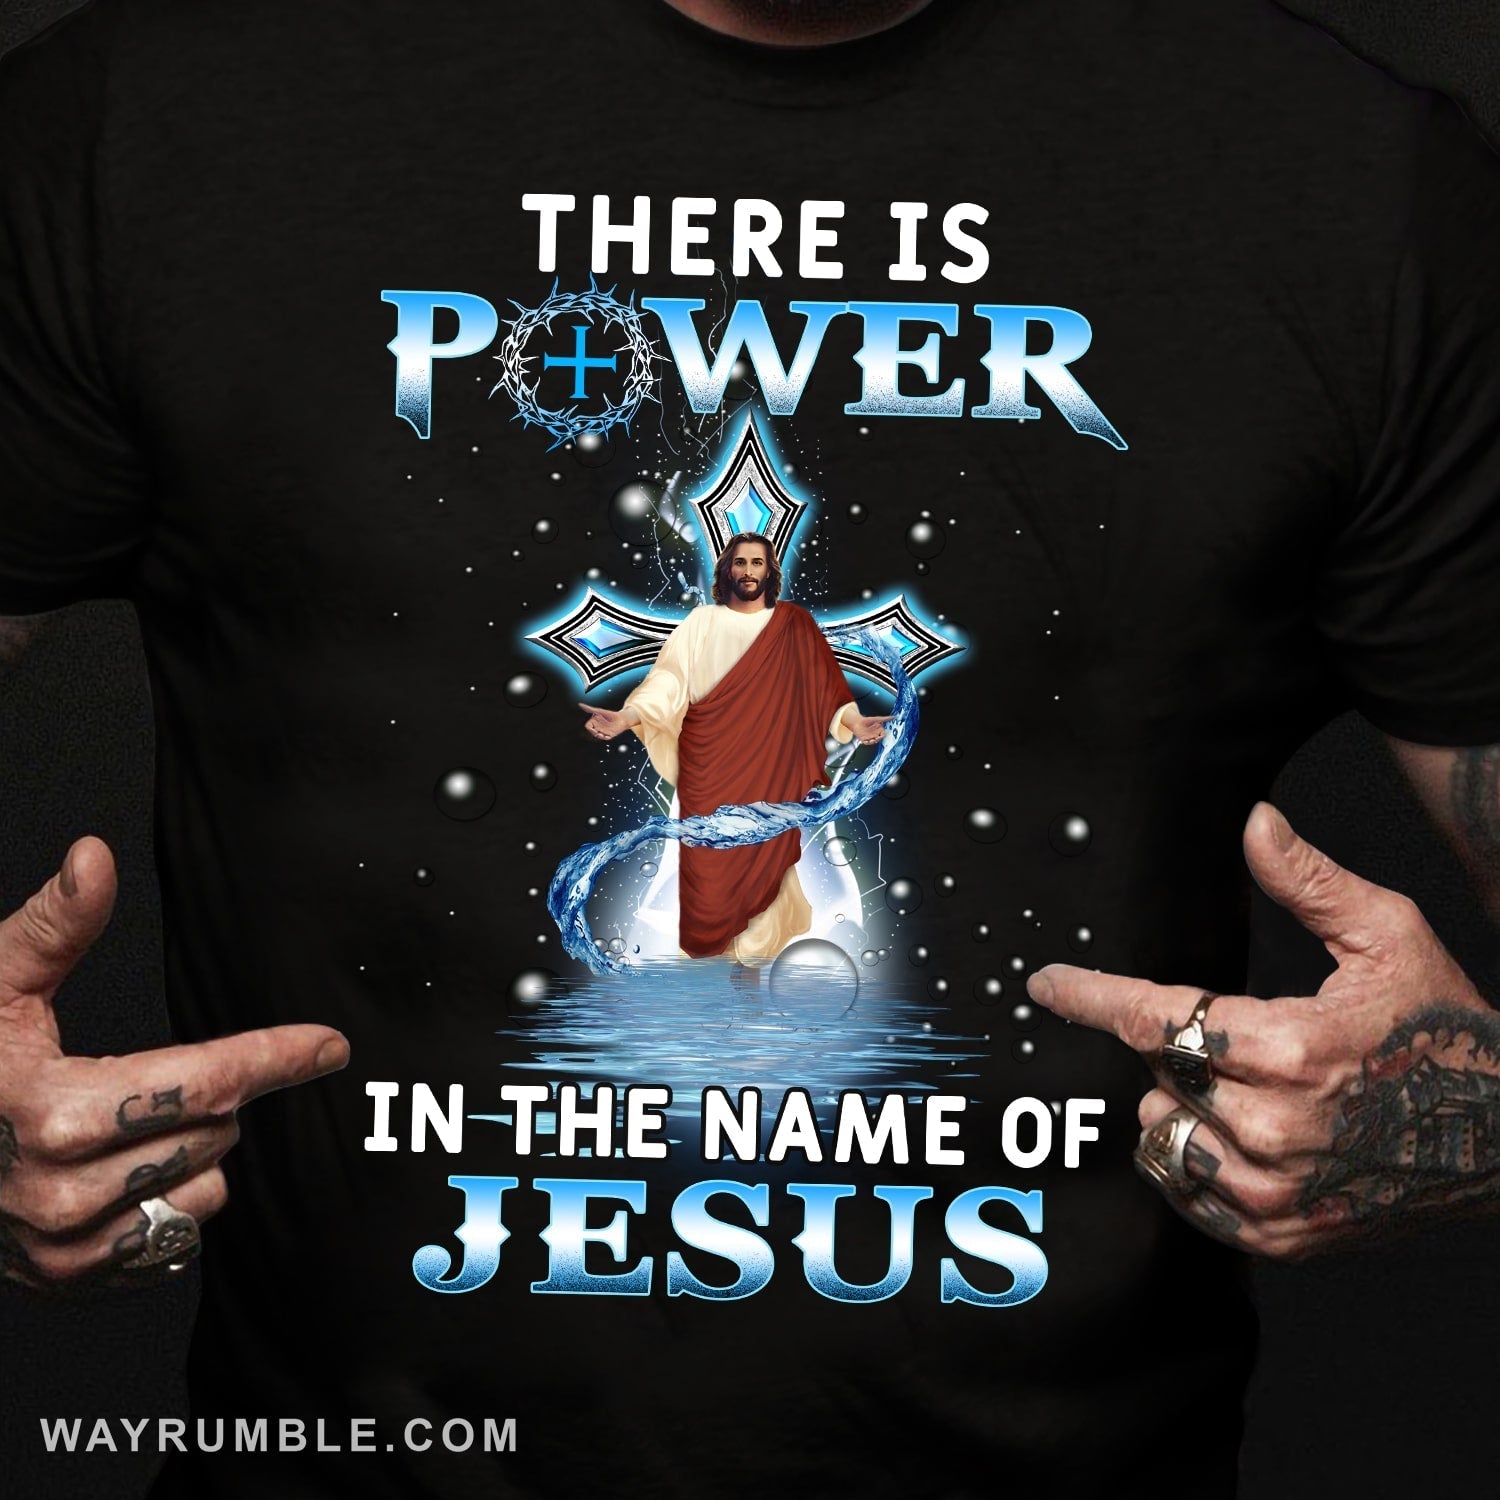 Jesus walks on water, There is power in the name of Jesus, The blue cross – Jesus T Shirt